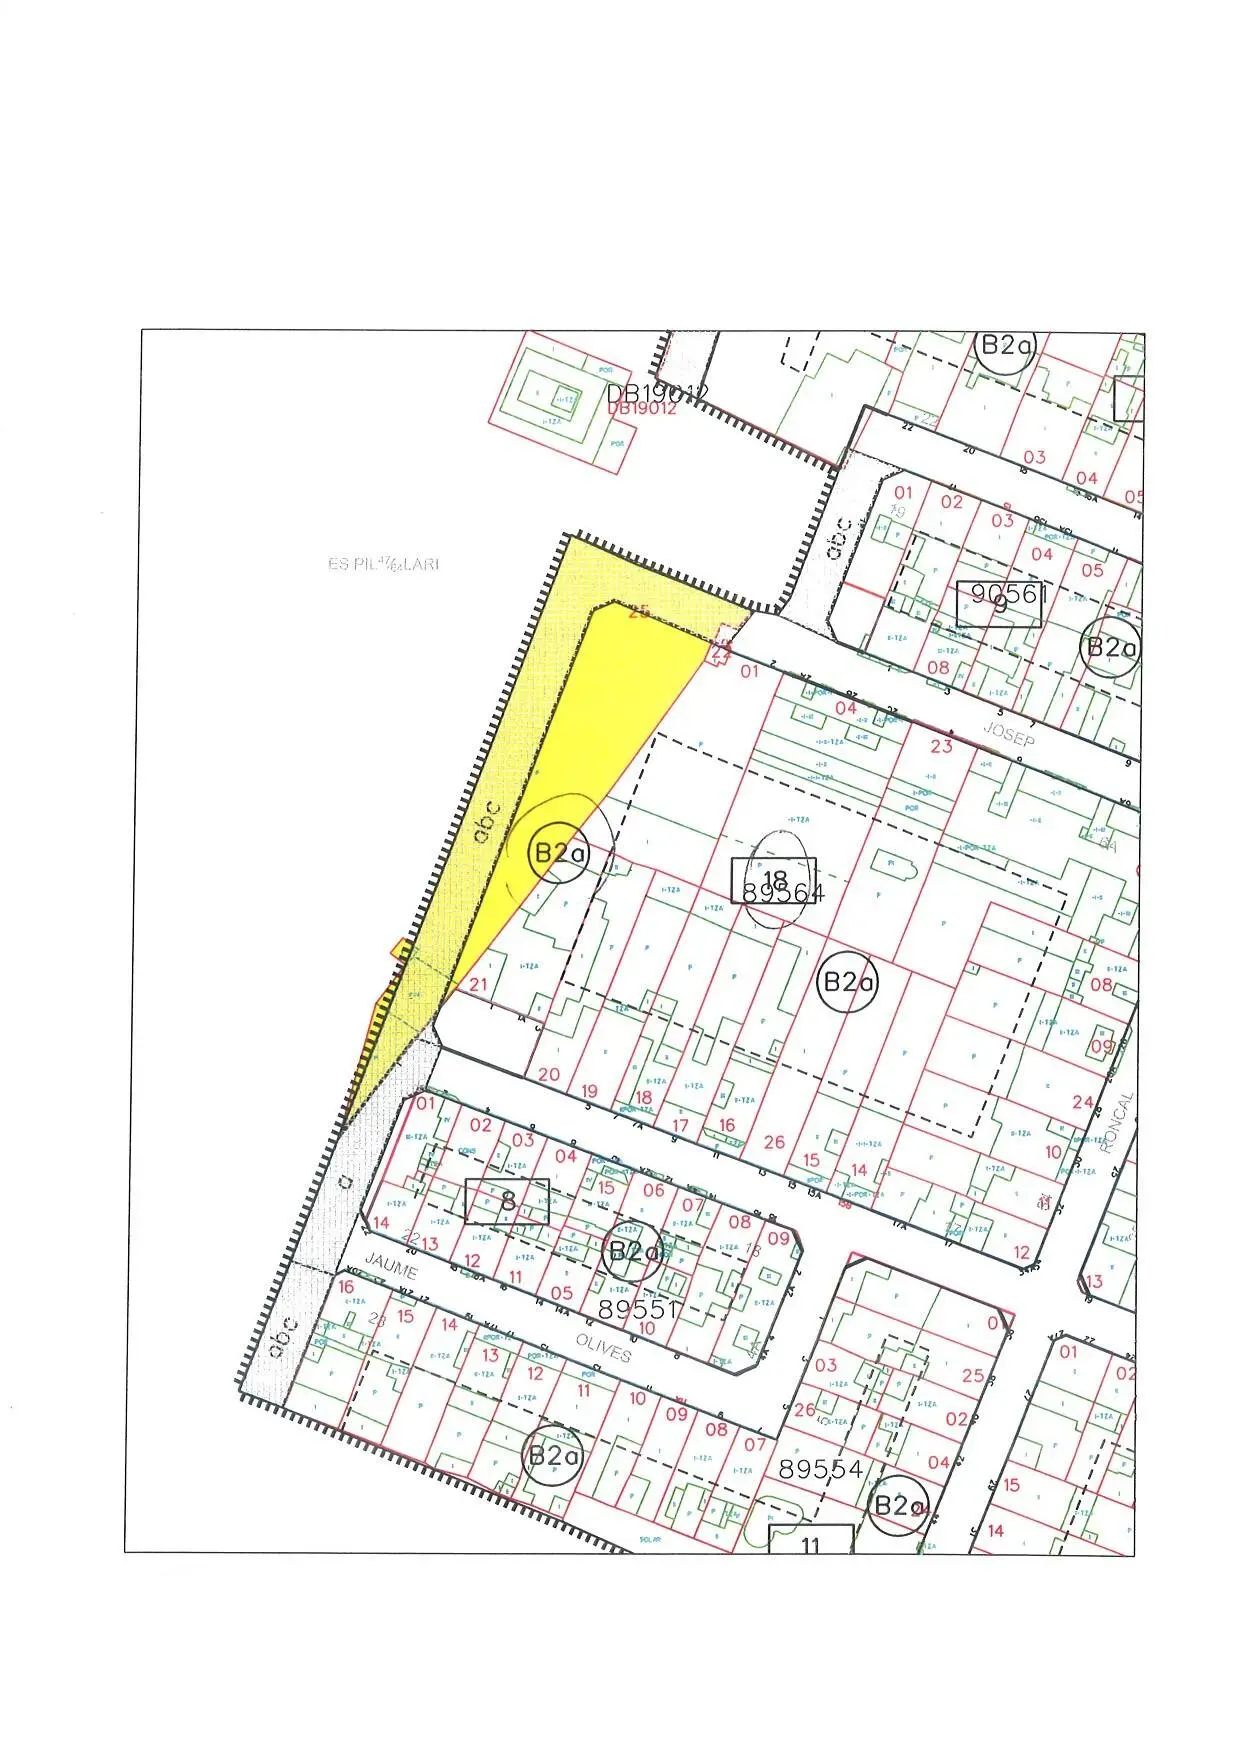 Plot of land with the possibility of building 19 houses (856.76 m²)